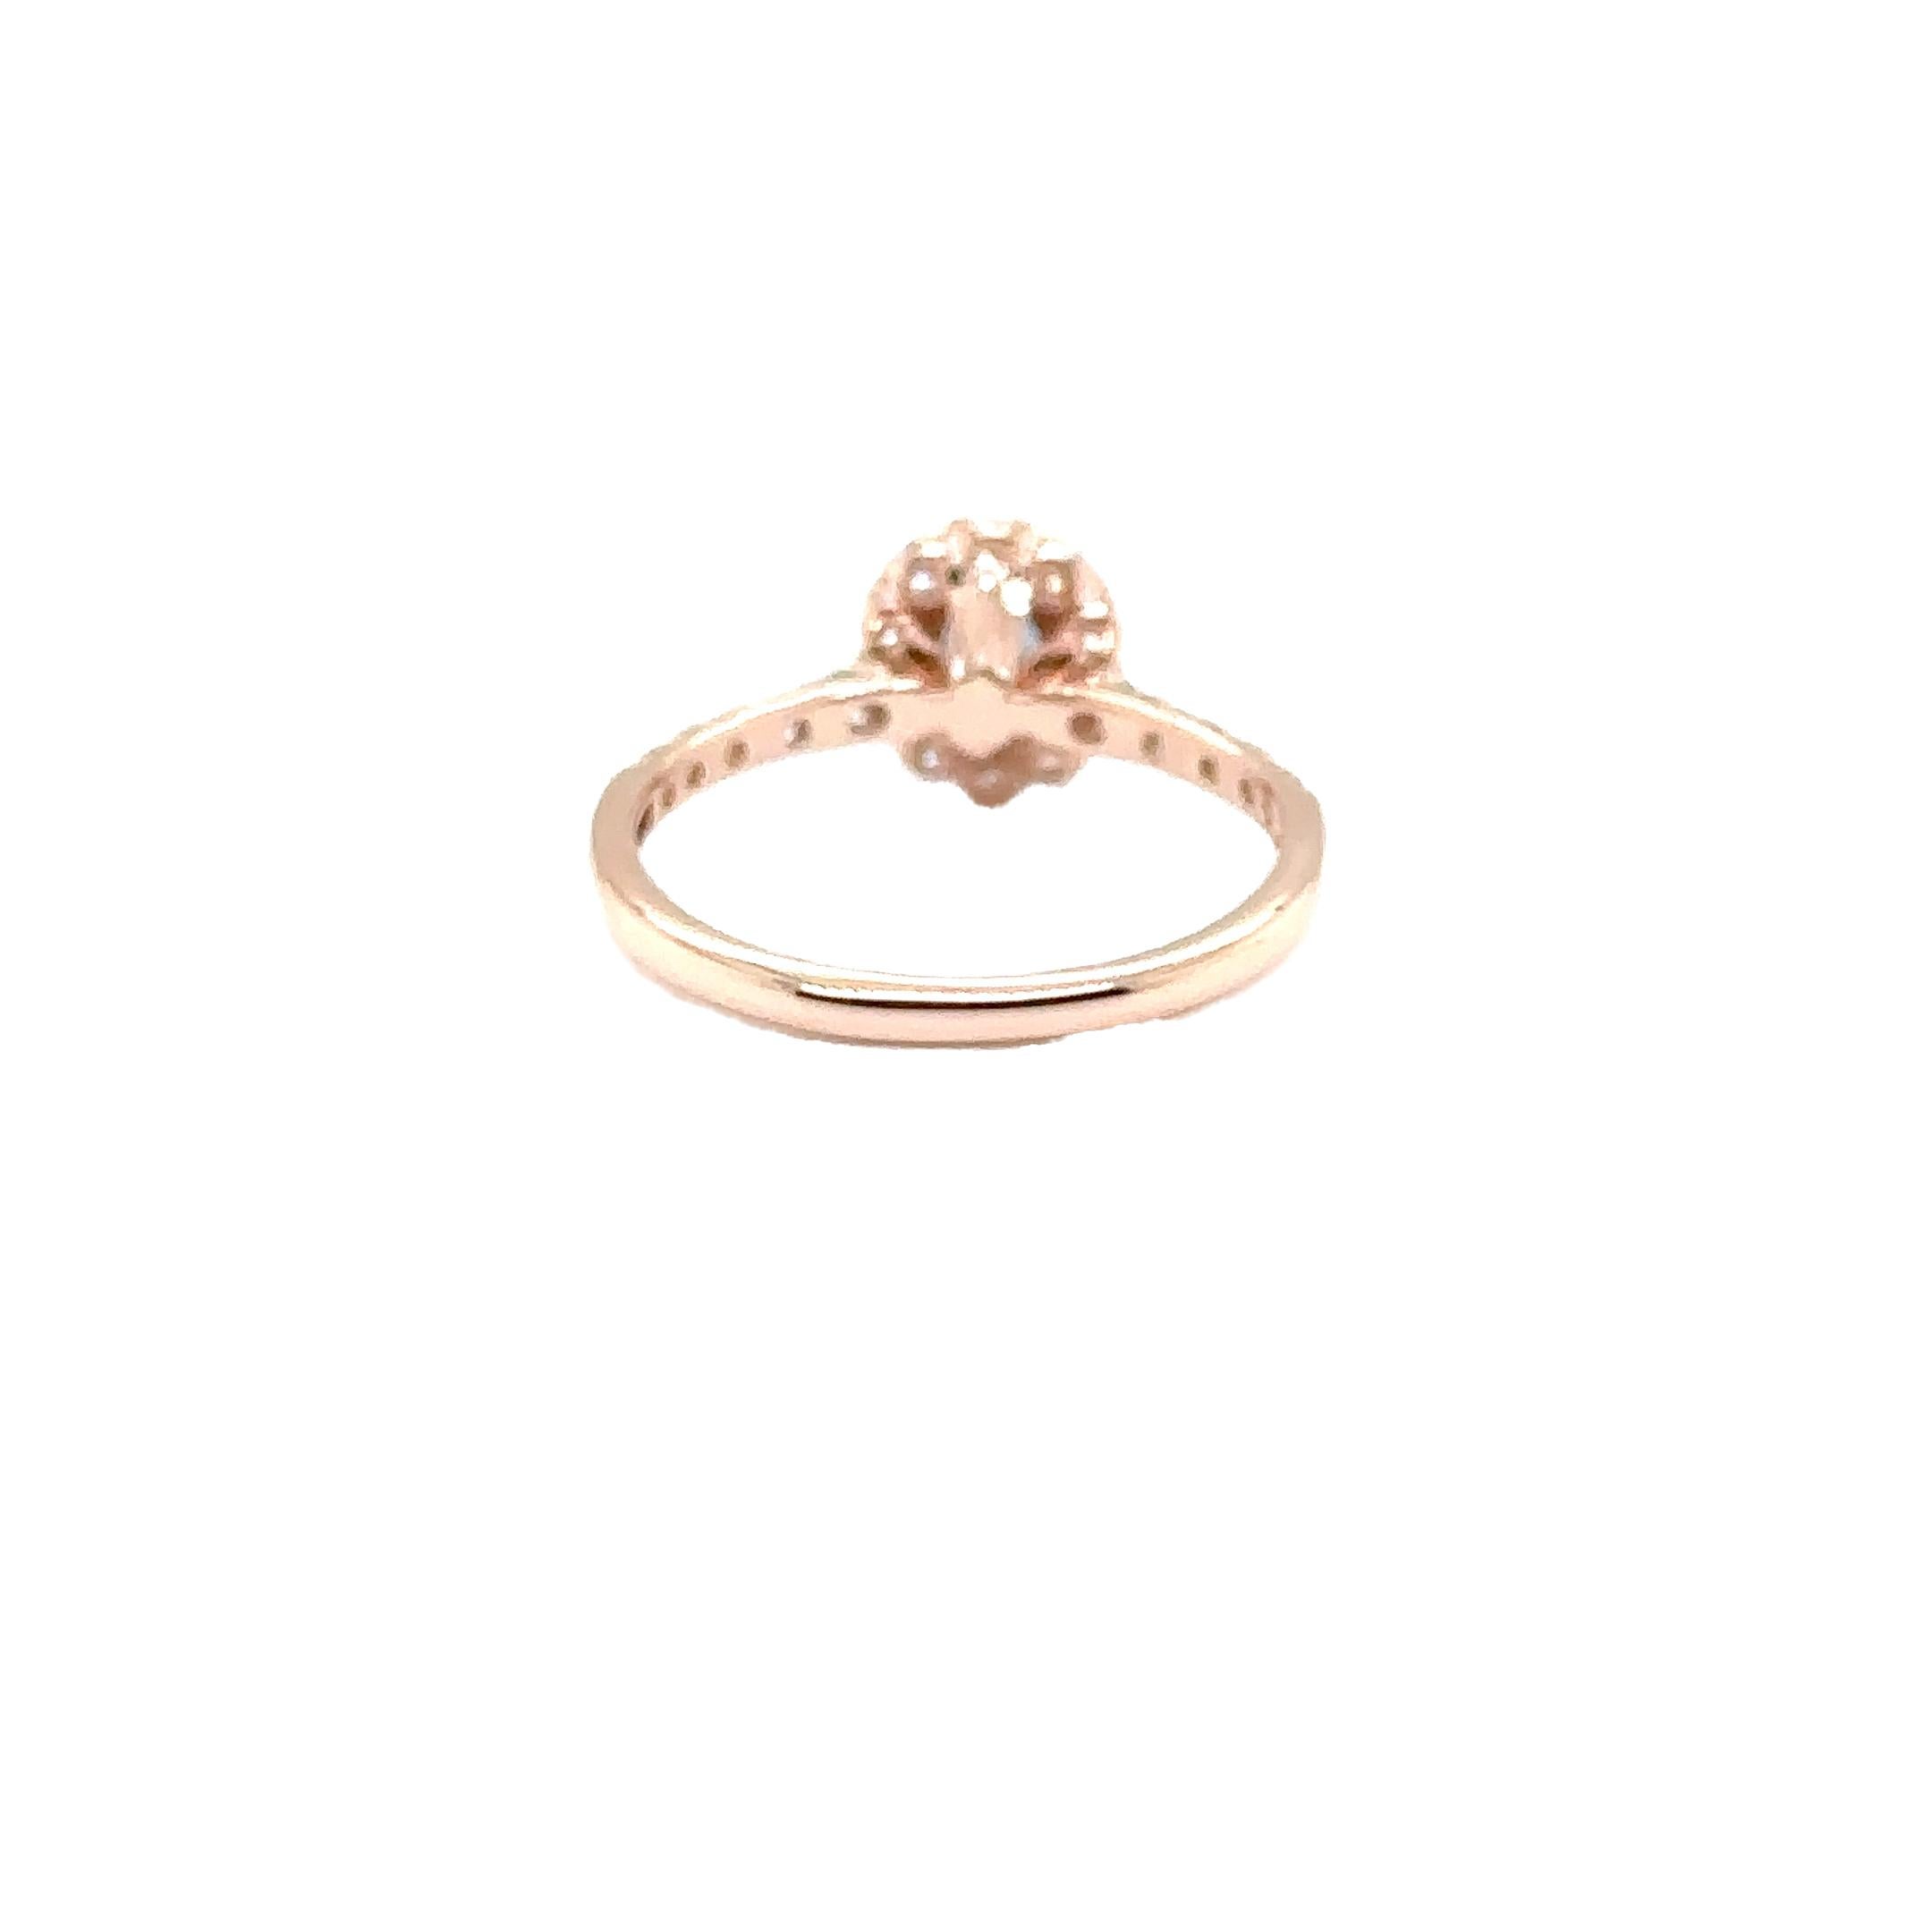 JAS-21-2235 - 14K ROSE GOLD OVAL SAPPHIRE RING with DIAMONDS For Sale 2